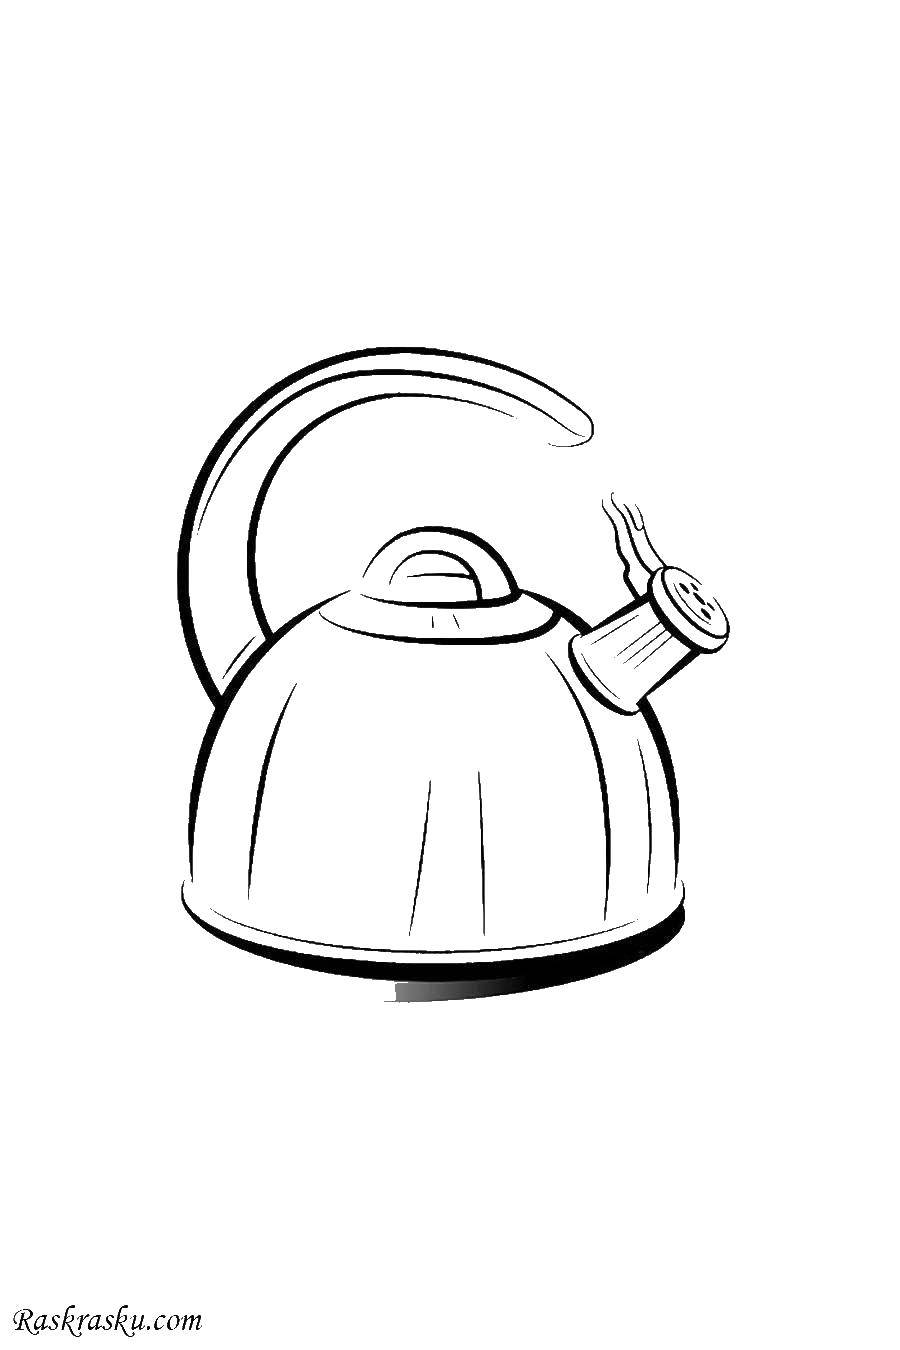 Coloring Kettle. Category dishes. Tags:  the kettle handle, lid.